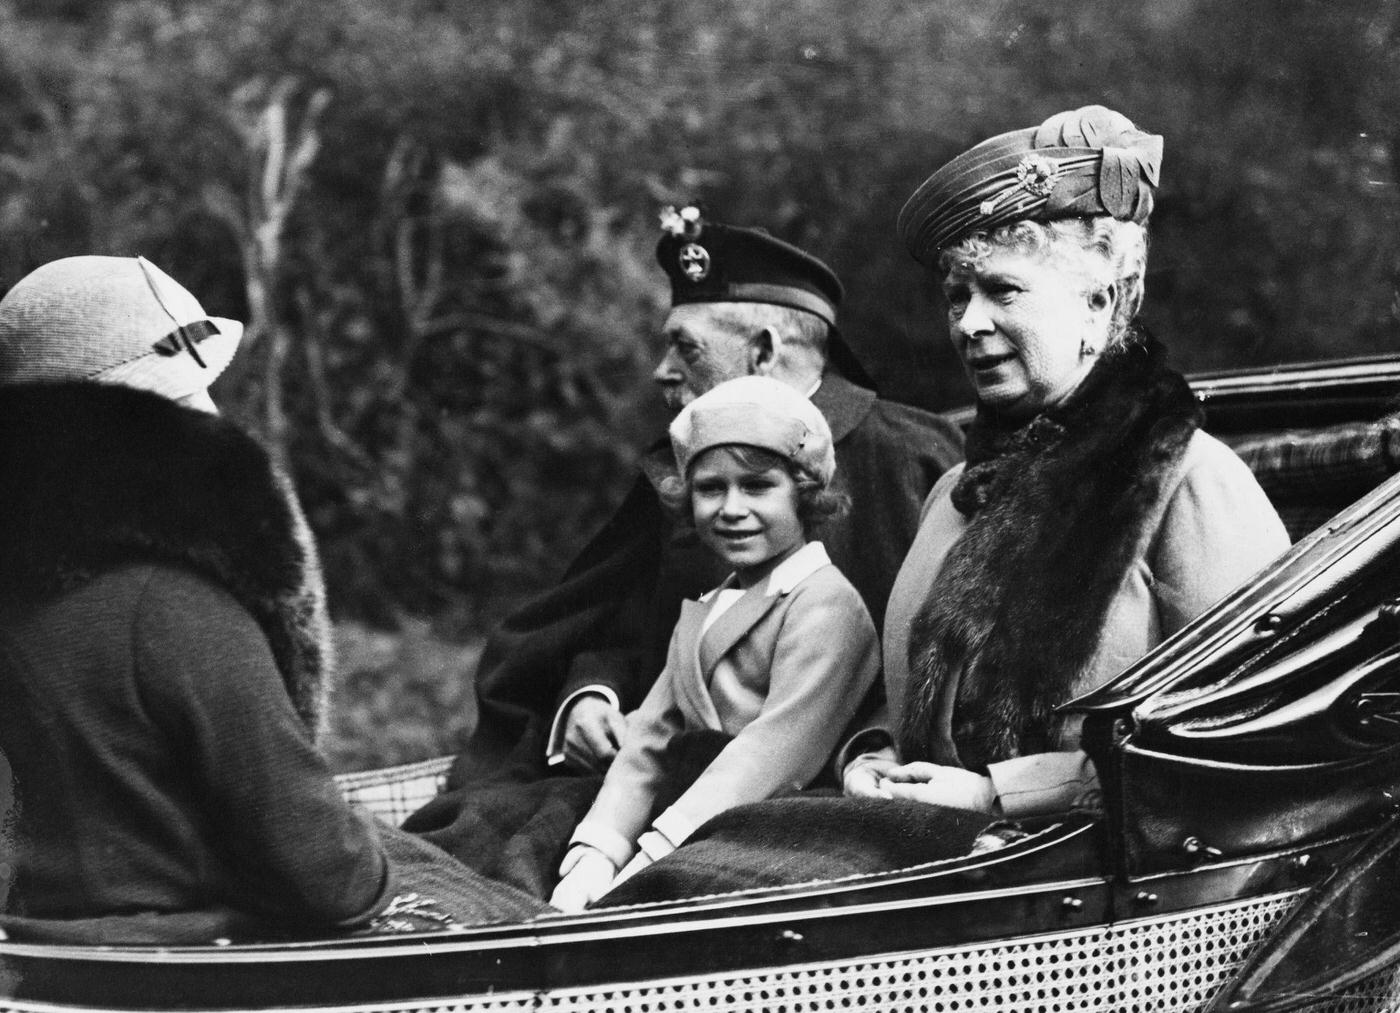 Princess Elizabeth seated between her grandfather King George V and grandmother Queen Mary of Teck as they ride in a carriage back to Balmoral Castle from Crathie Kirk near Braemar in Scotland in August 1935.